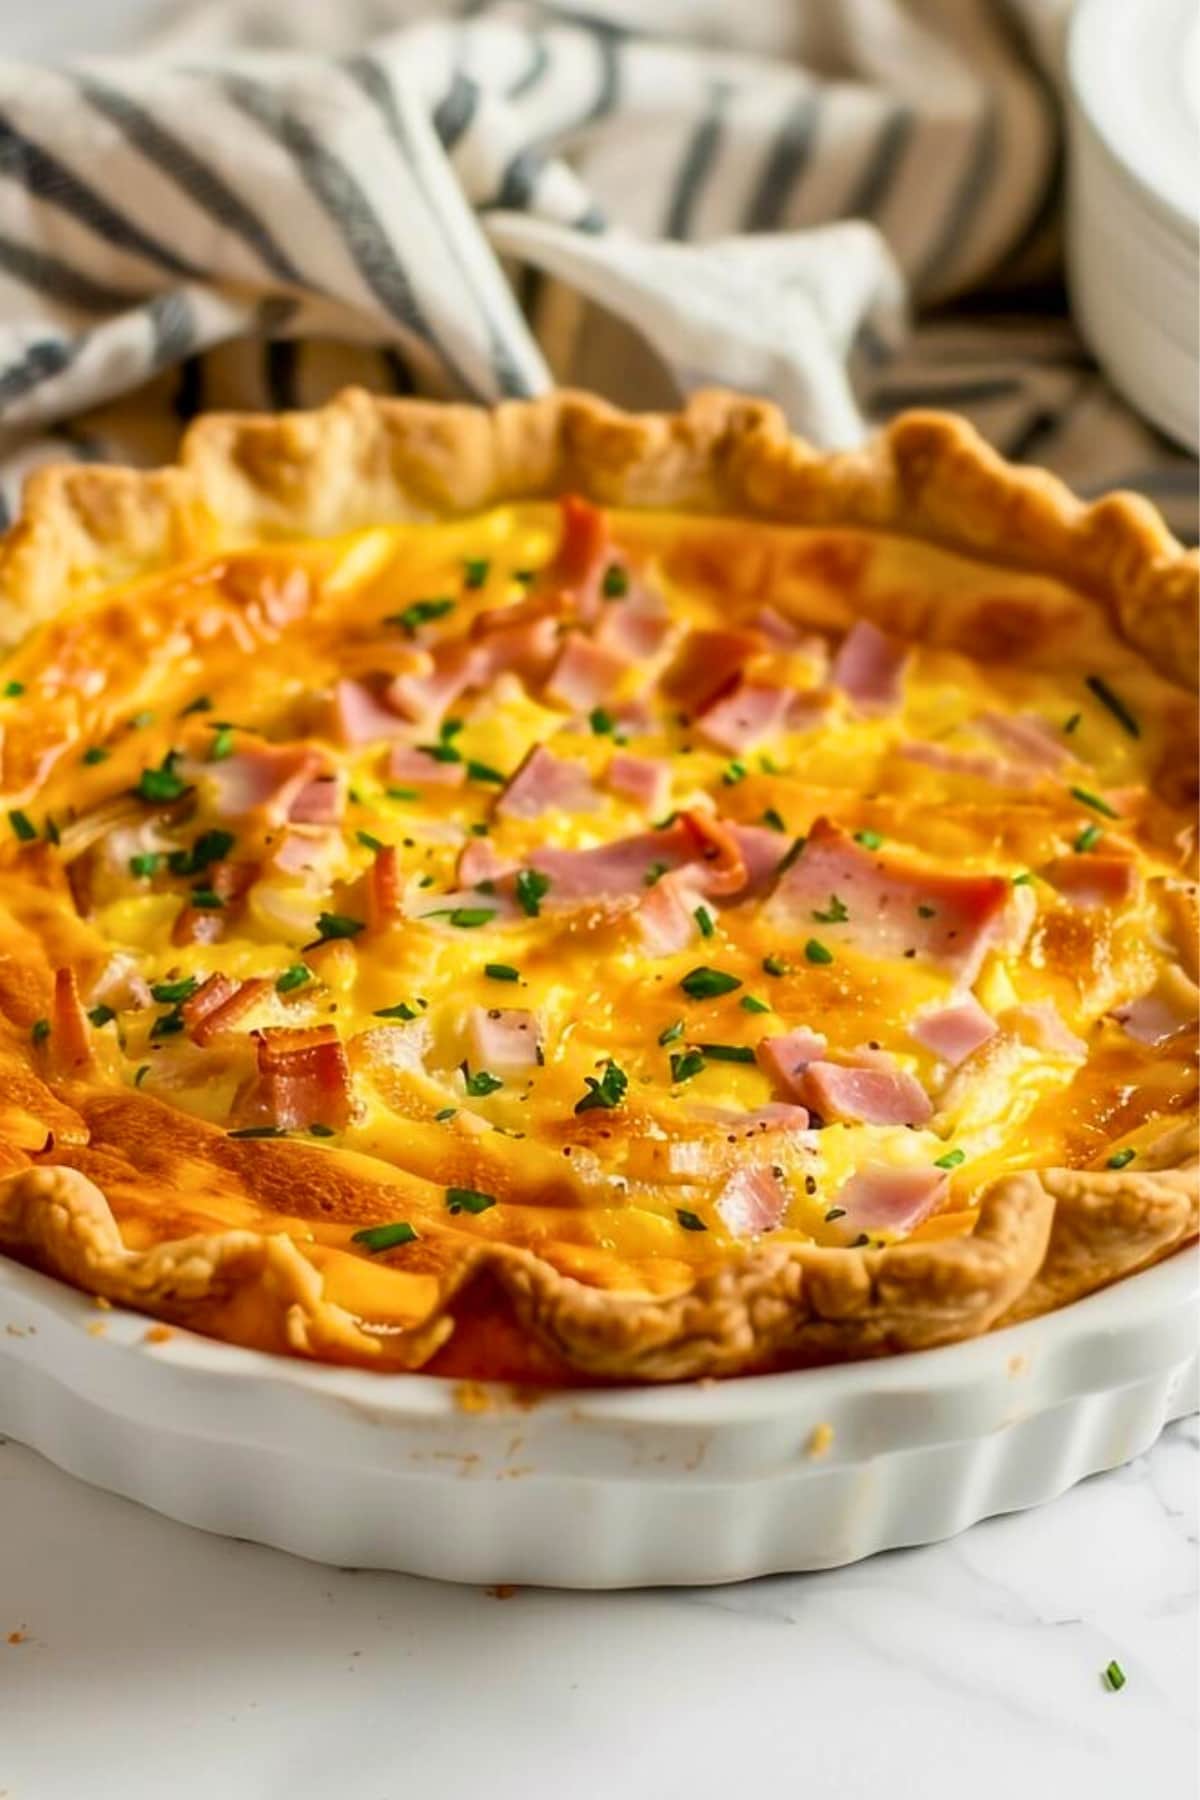 Ham and cheese quiche in a white pie dish, towel beside.